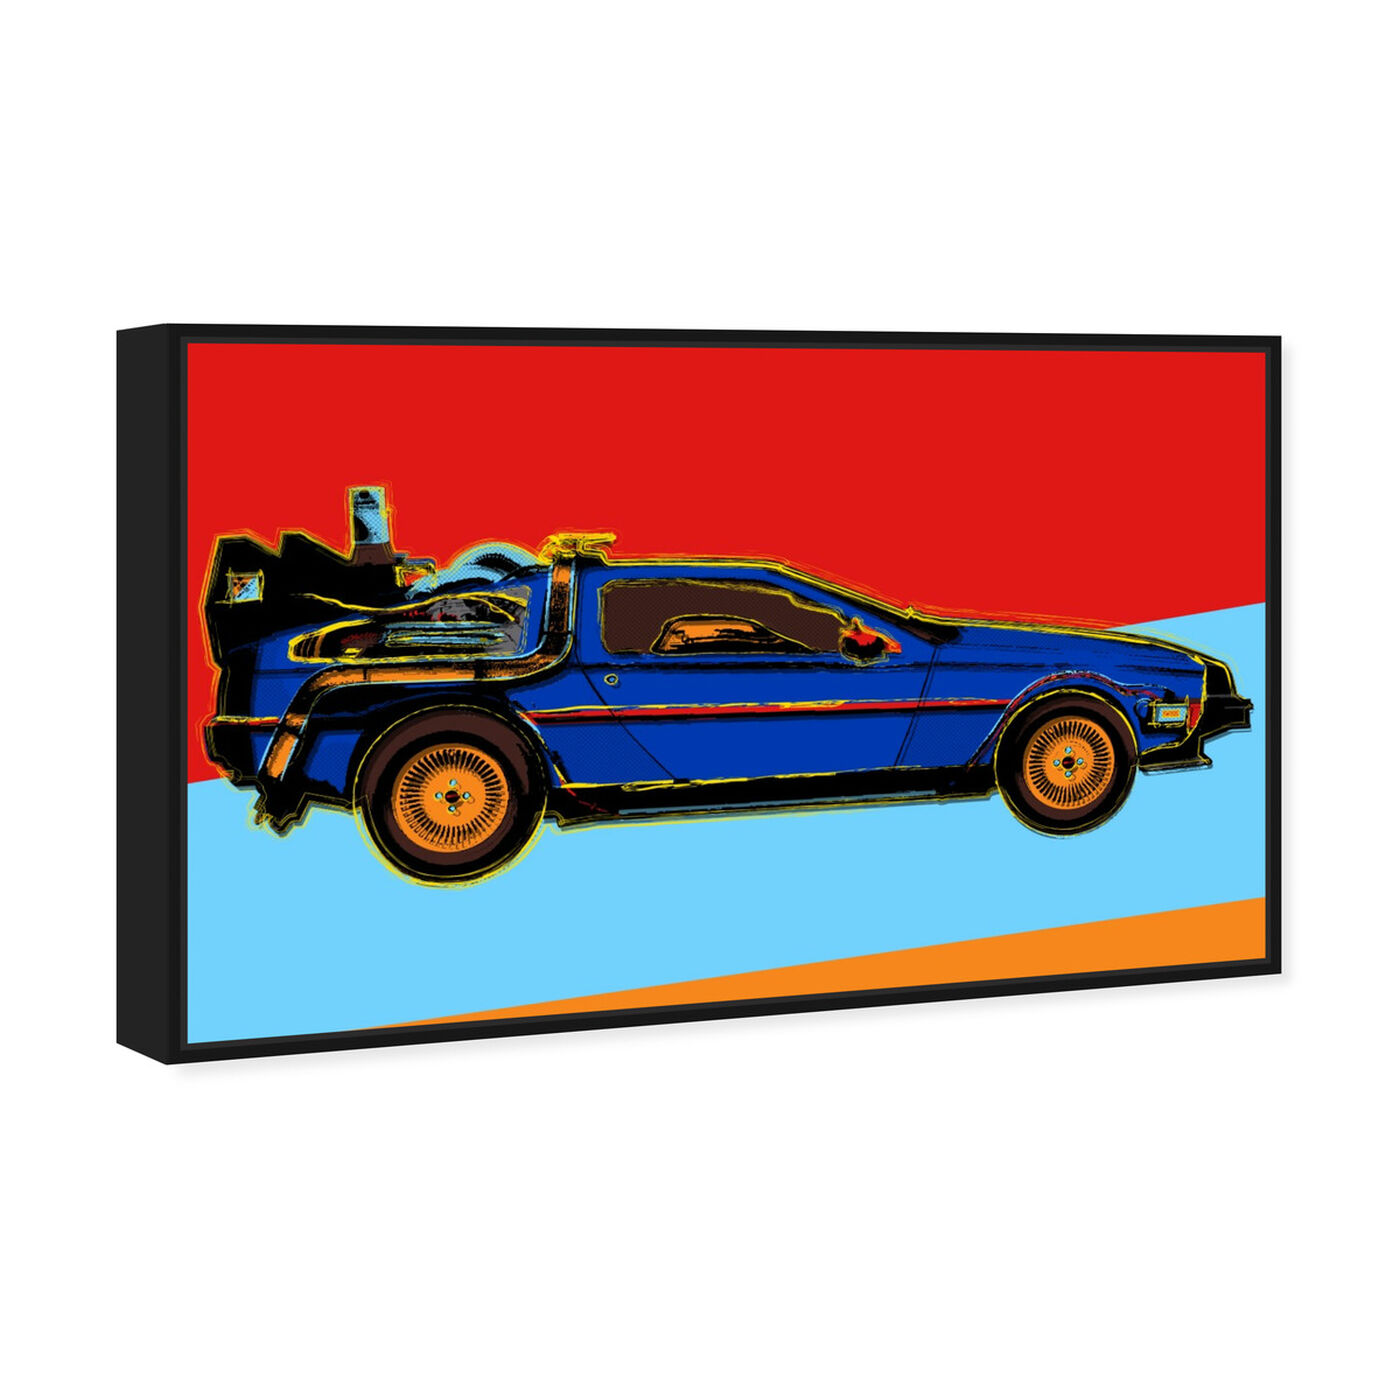 Angled view of Warhol style Delorean featuring transportation and automobiles art.